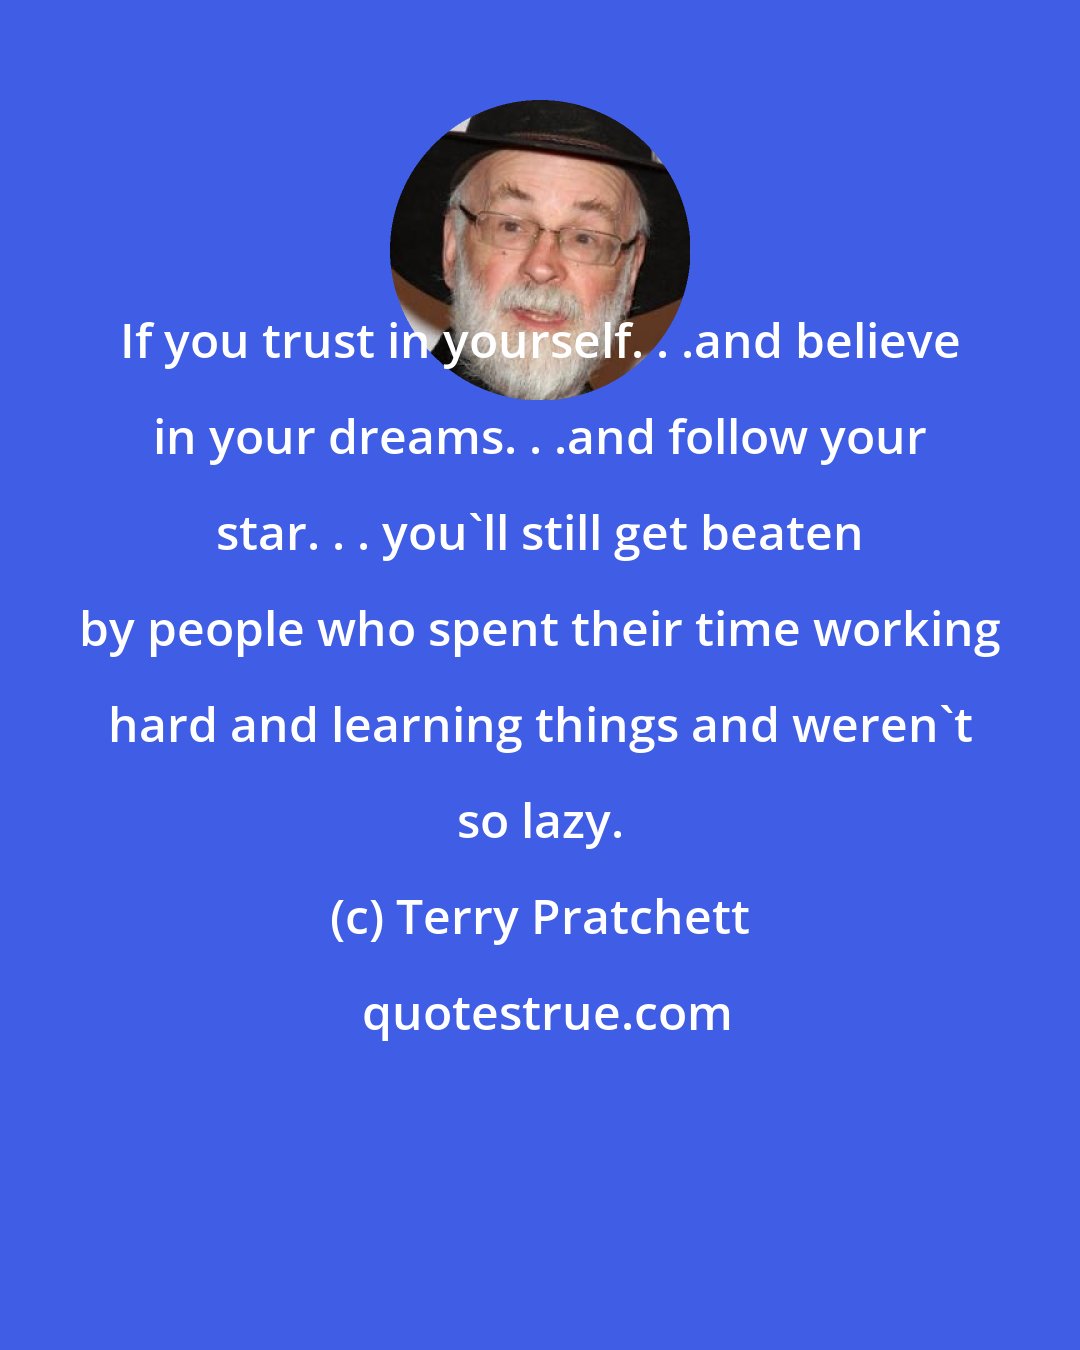 Terry Pratchett: If you trust in yourself. . .and believe in your dreams. . .and follow your star. . . you'll still get beaten by people who spent their time working hard and learning things and weren't so lazy.